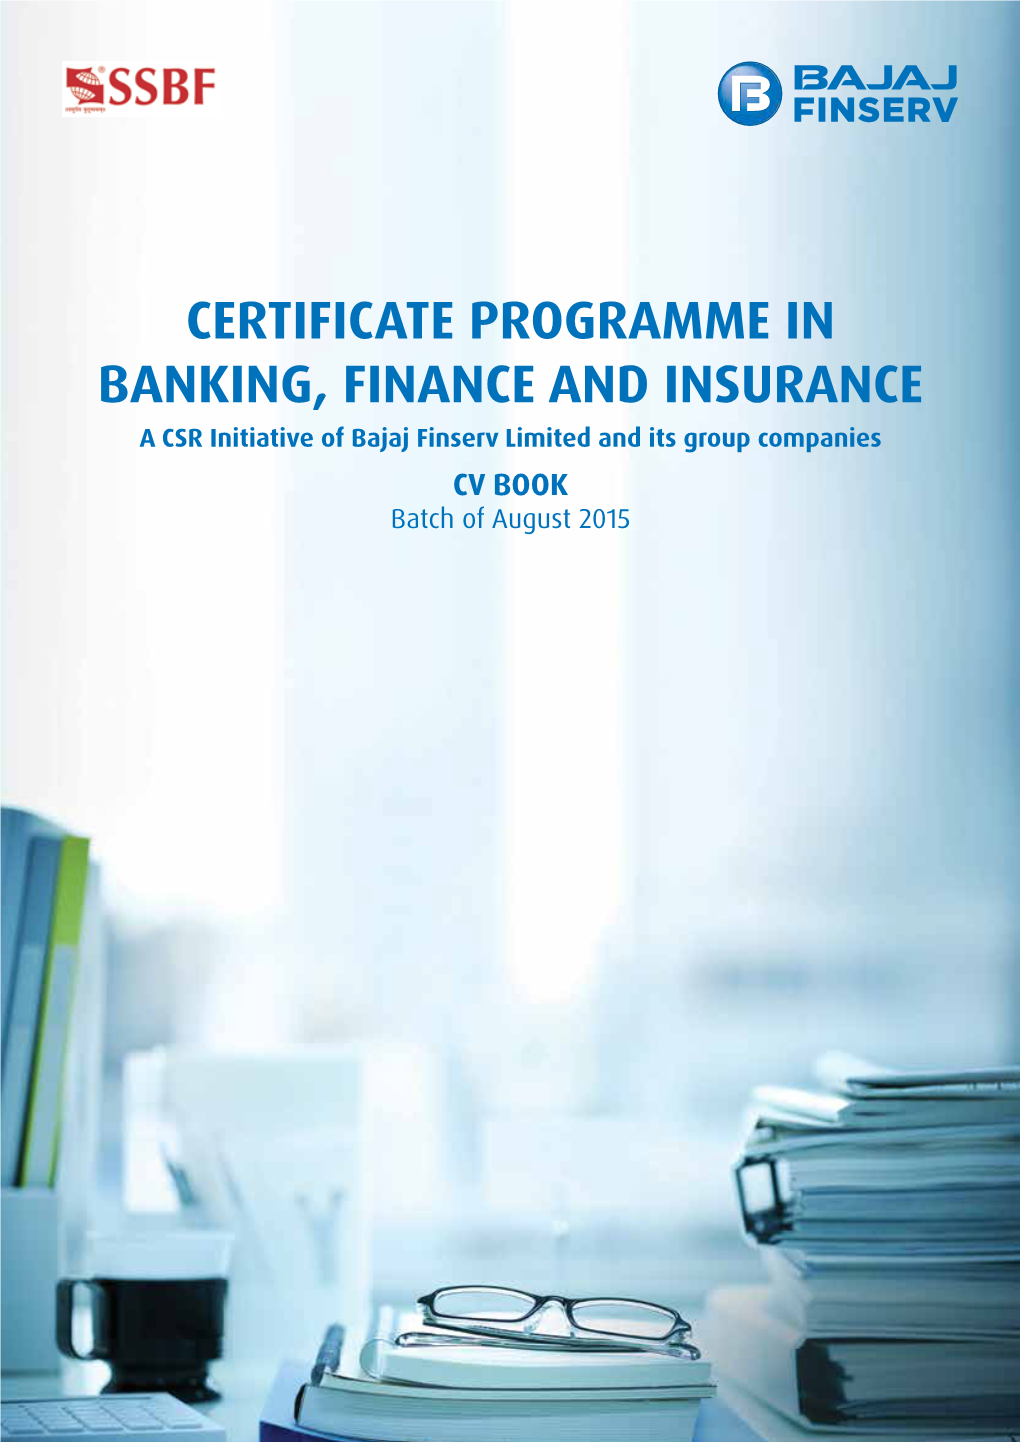 Certificate Programme in Banking, Finance and Insurance